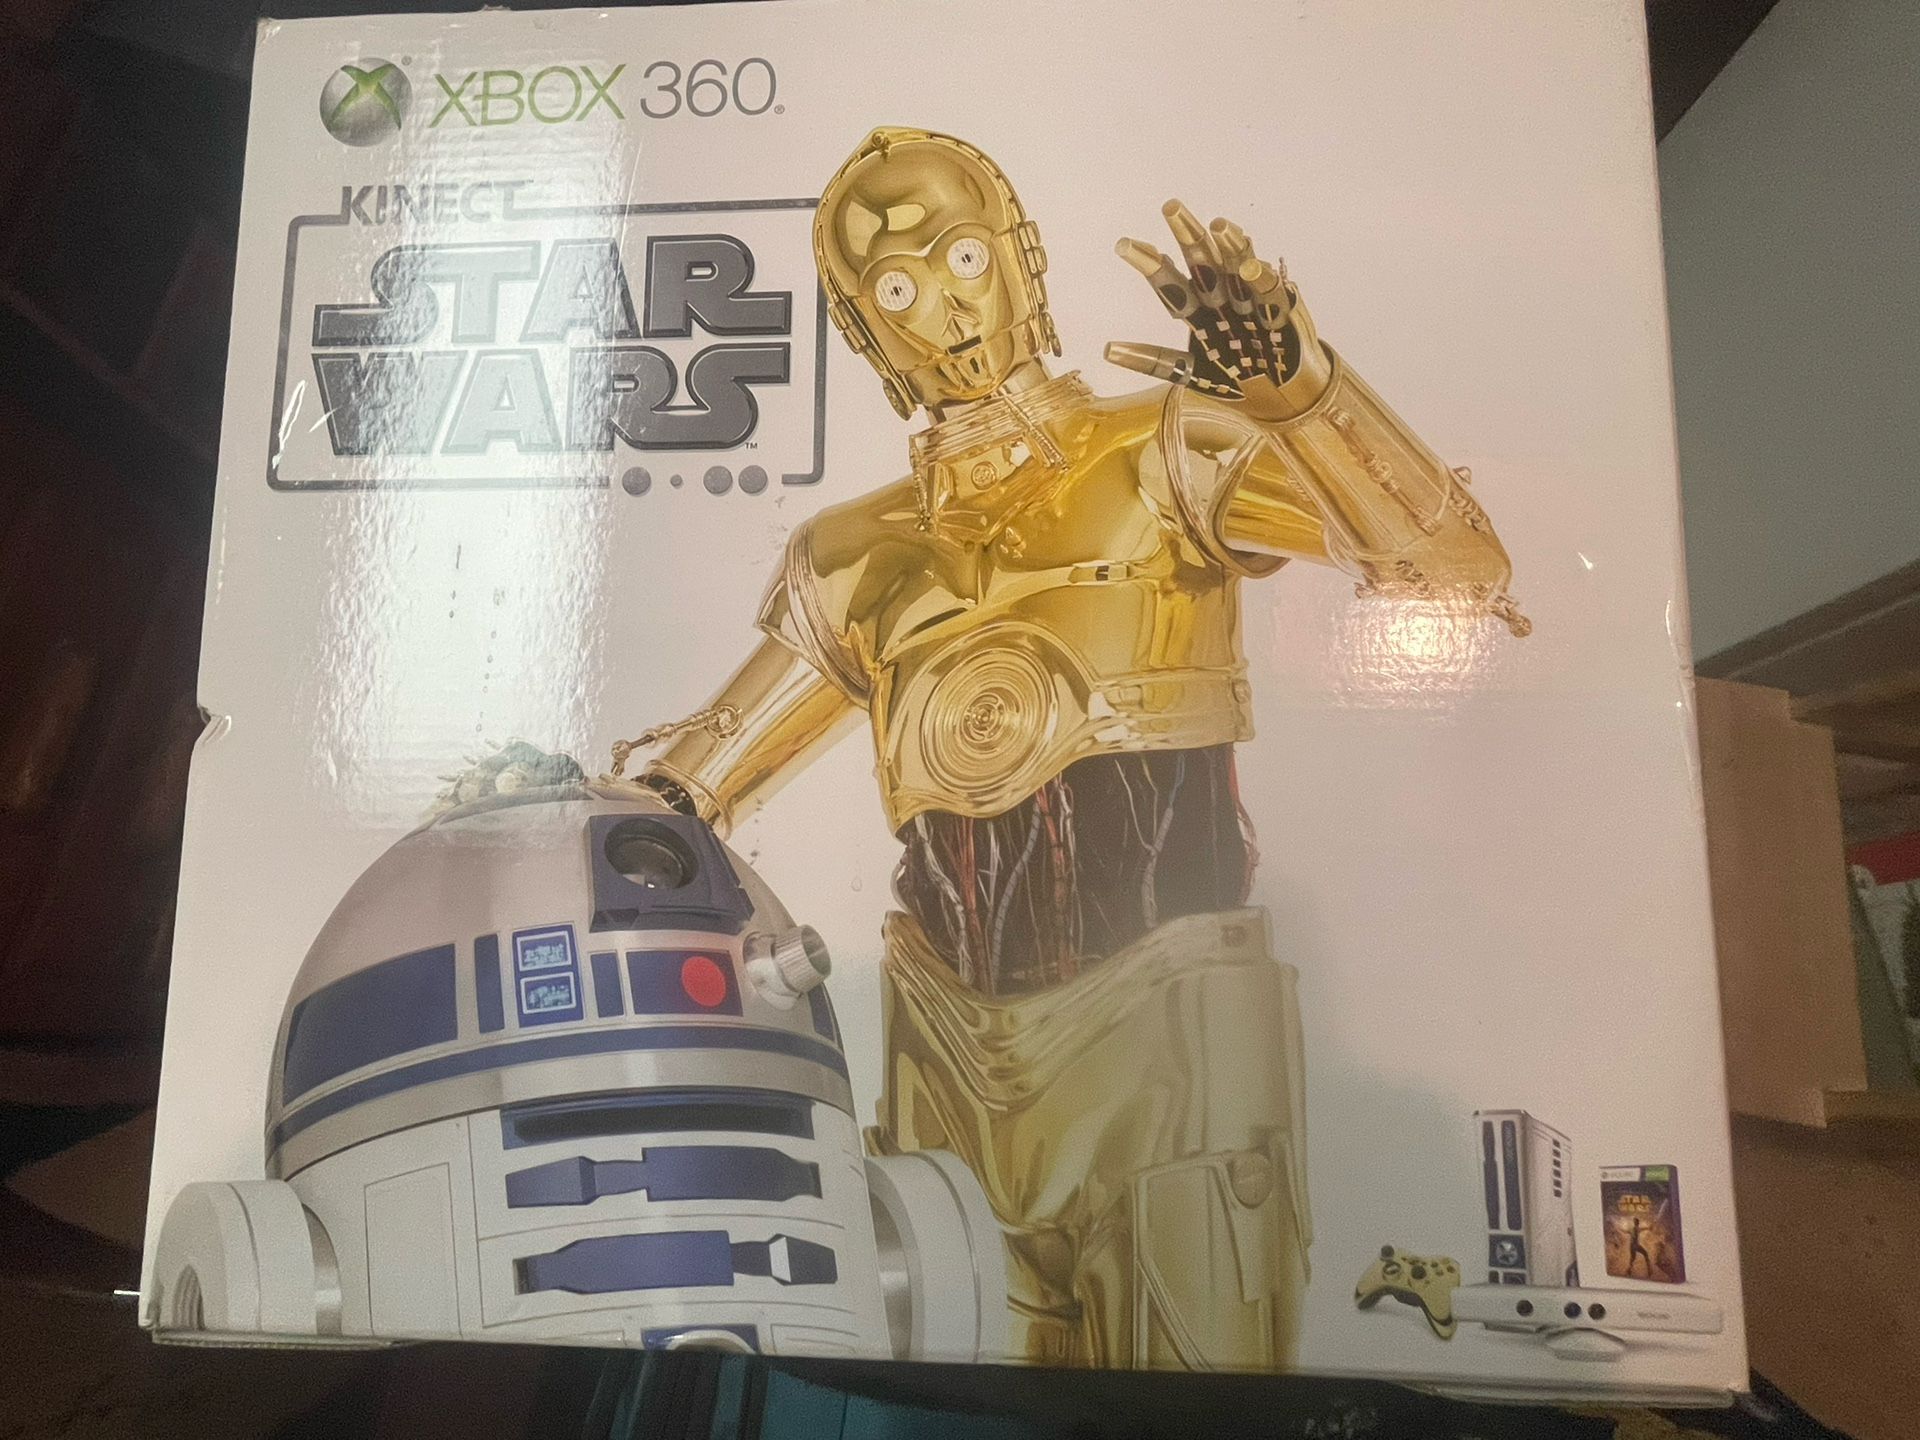 Brand new Unopened Limited edition Xbox 360 Connect Starwars Edition